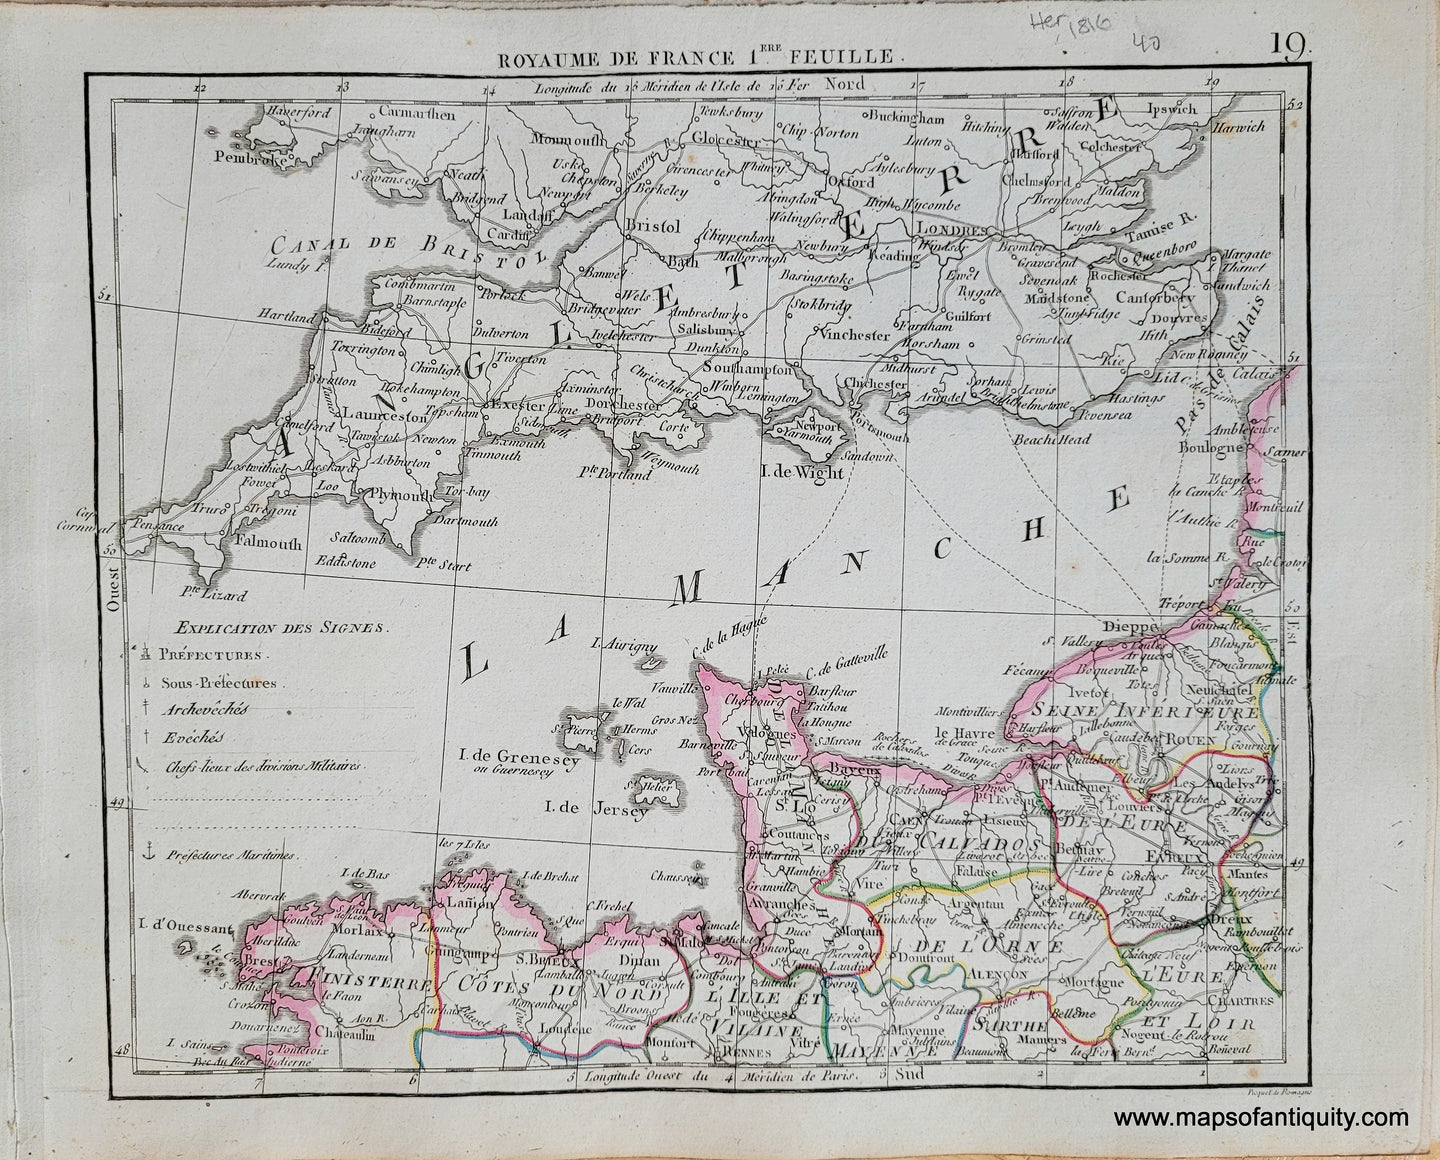 Genuine-Antique-Map-France-in-6-sheets-Sheet-1-Royaume-de-France-1ere-Feuille-France-1816-Herisson-Maps-Of-Antiquity-1800s-19th-century